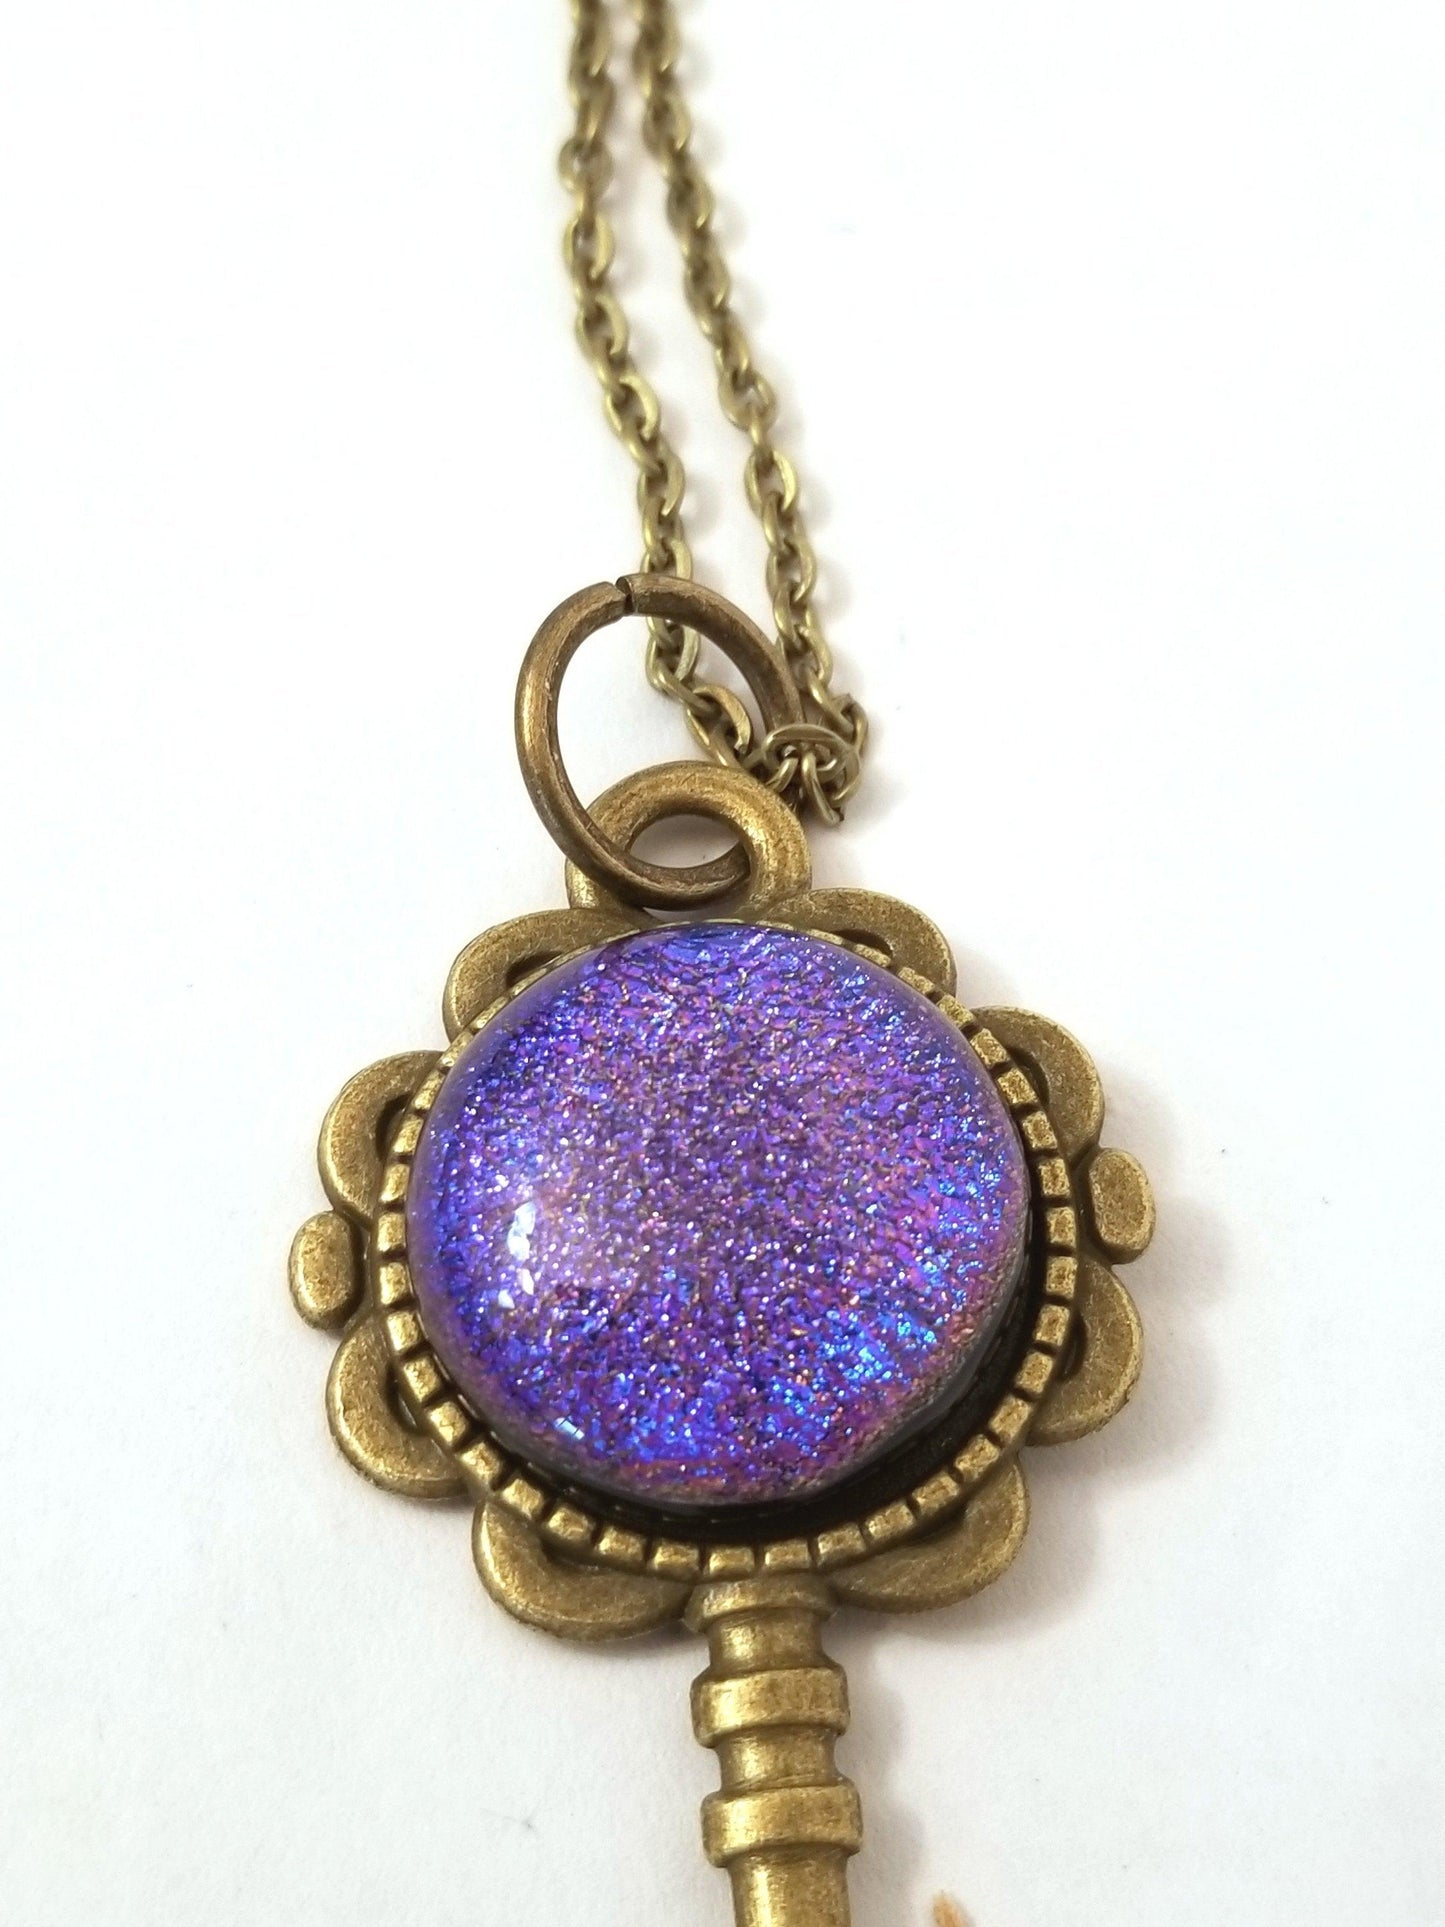 Antiqued Brass  Flowered Skeleton Key with Fused Glass Purple Dichroic cabochon on 24 inch brass plated chain